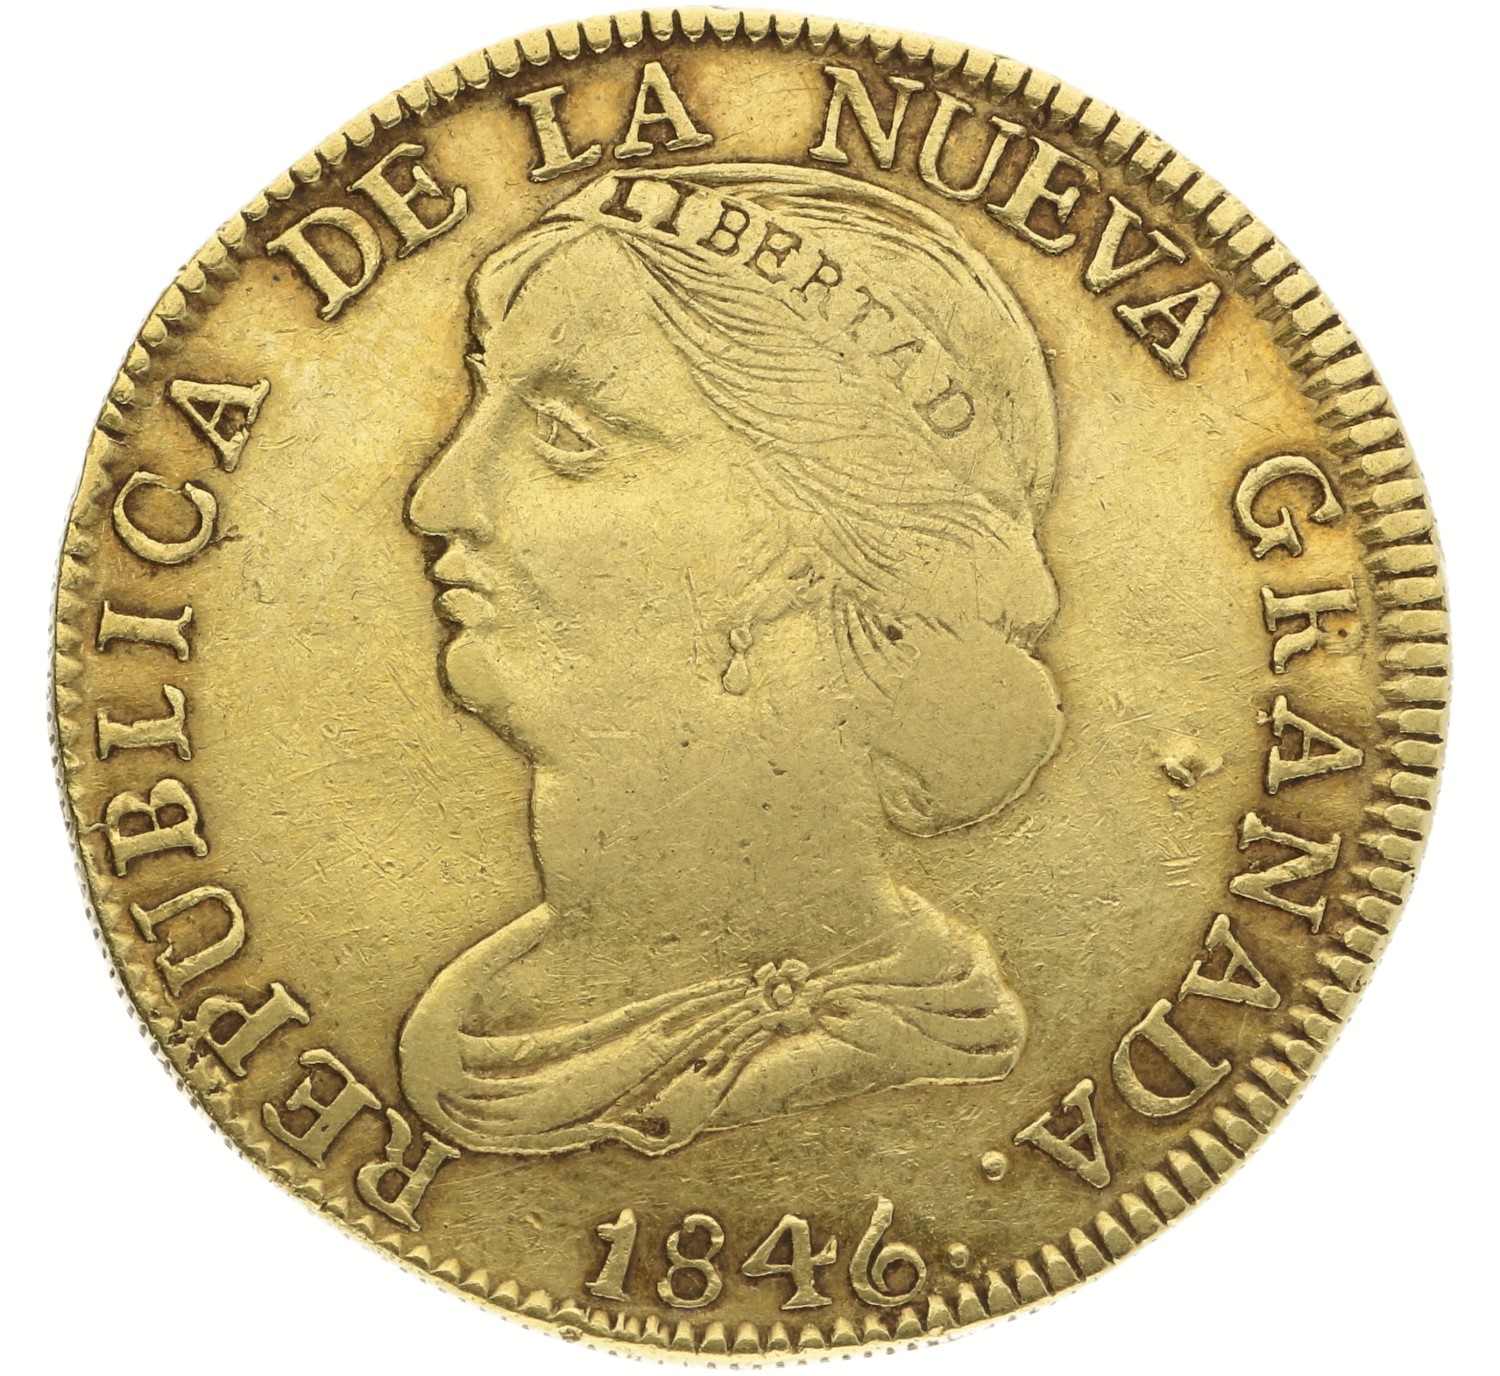 16 Pesos - Colombia Gold - 1846